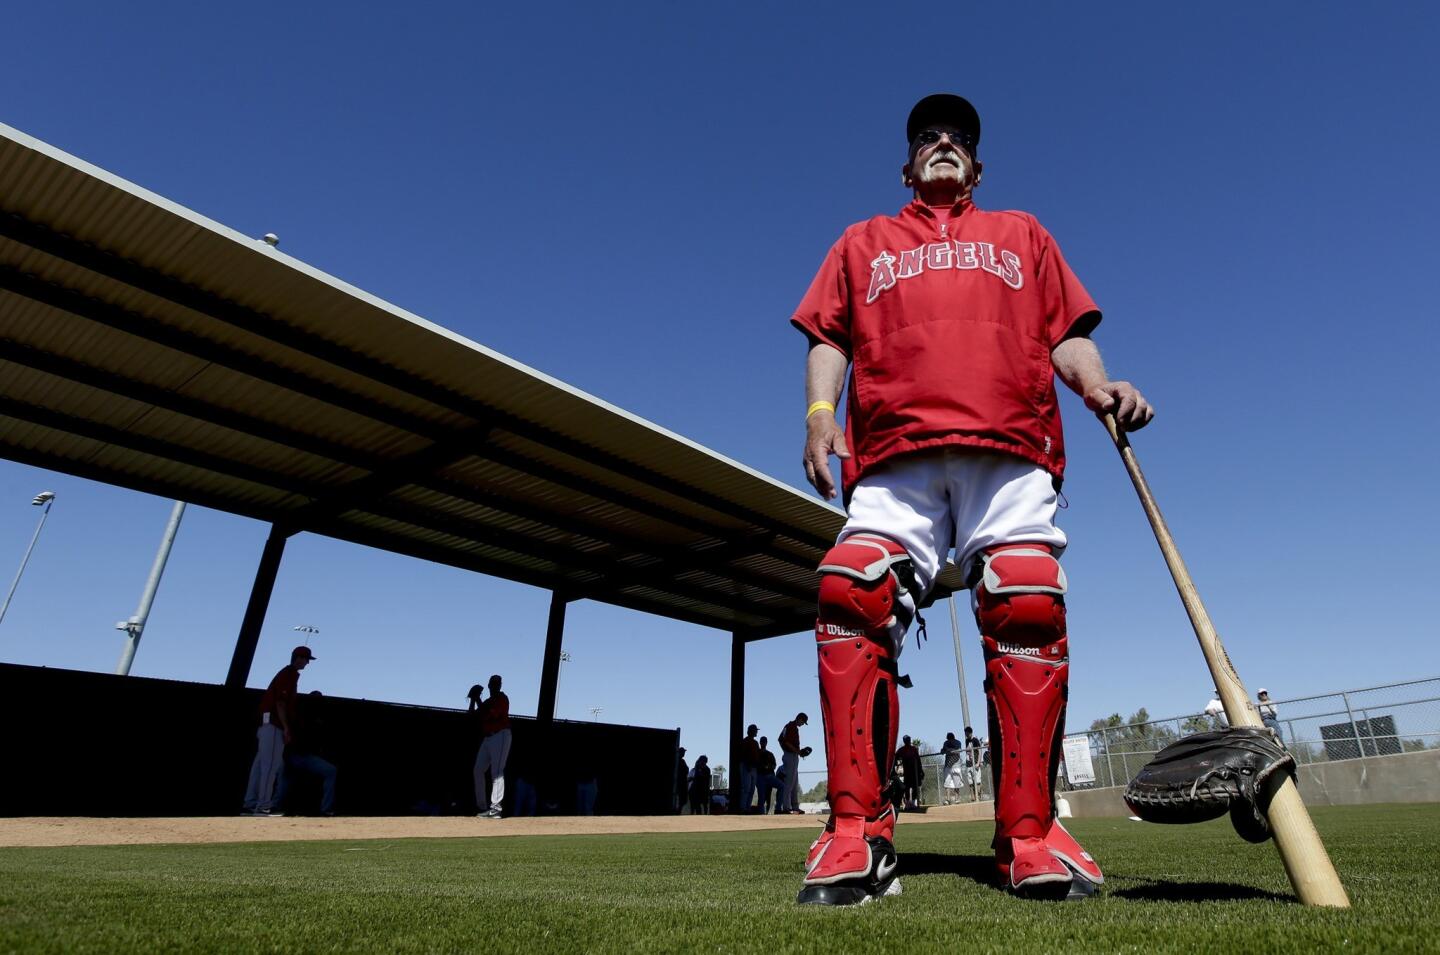 Los Angeles Angels catching coordinator Bill Lachemann, 78, on the field before a spring training baseball game against the Chicago White Sox in Tempe, Ariz.